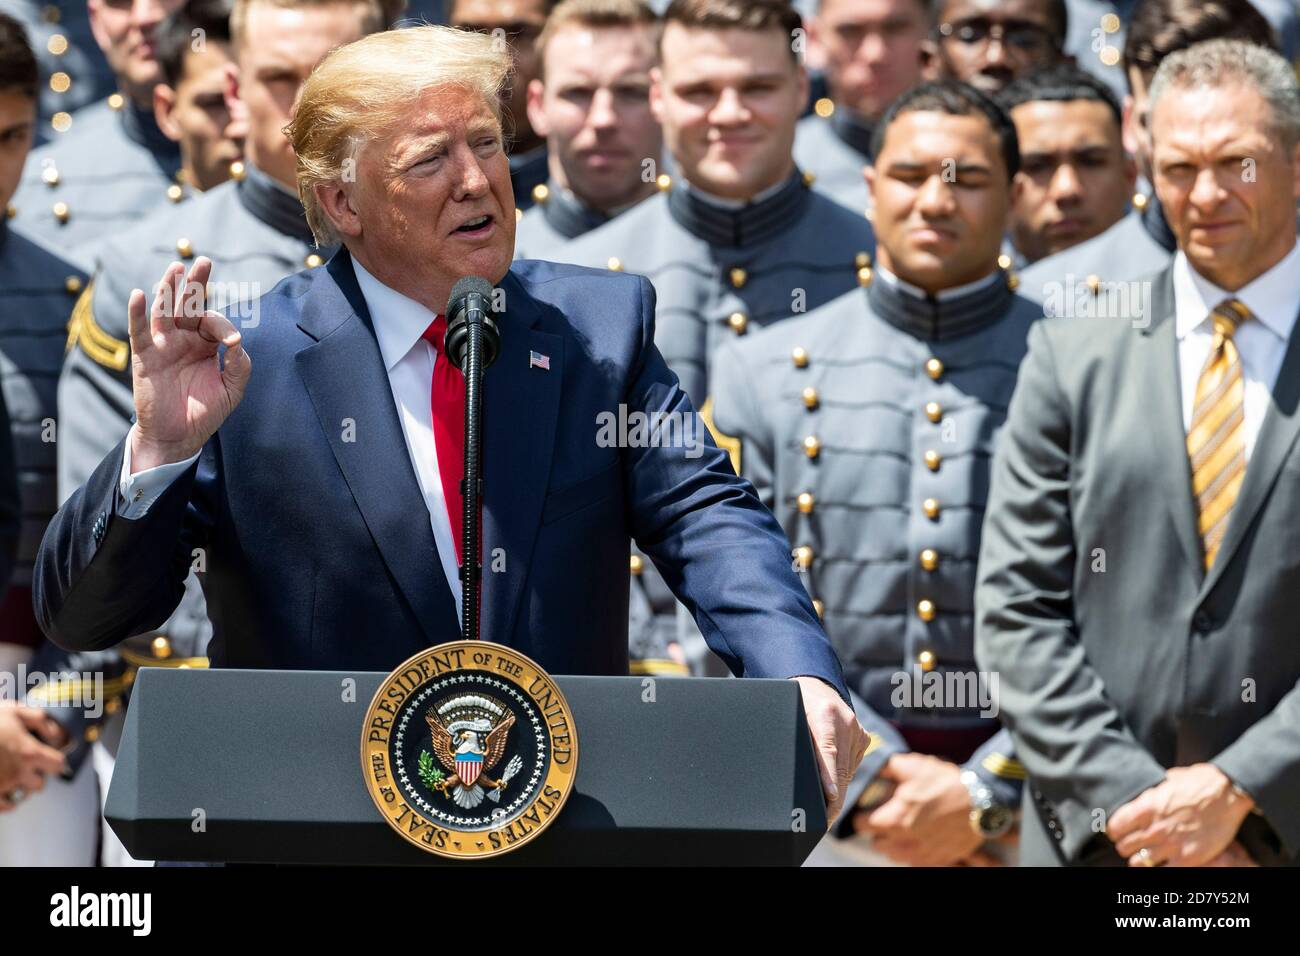 U.S. President Donald Trump delivers remarks prior to presenting the Commander-in-Chief’s trophy to the team in the White House Rose Garden in Washington, D.C. on Monday, May 6, 2019. Credit: Alex Edelman/The Photo Access Stock Photo